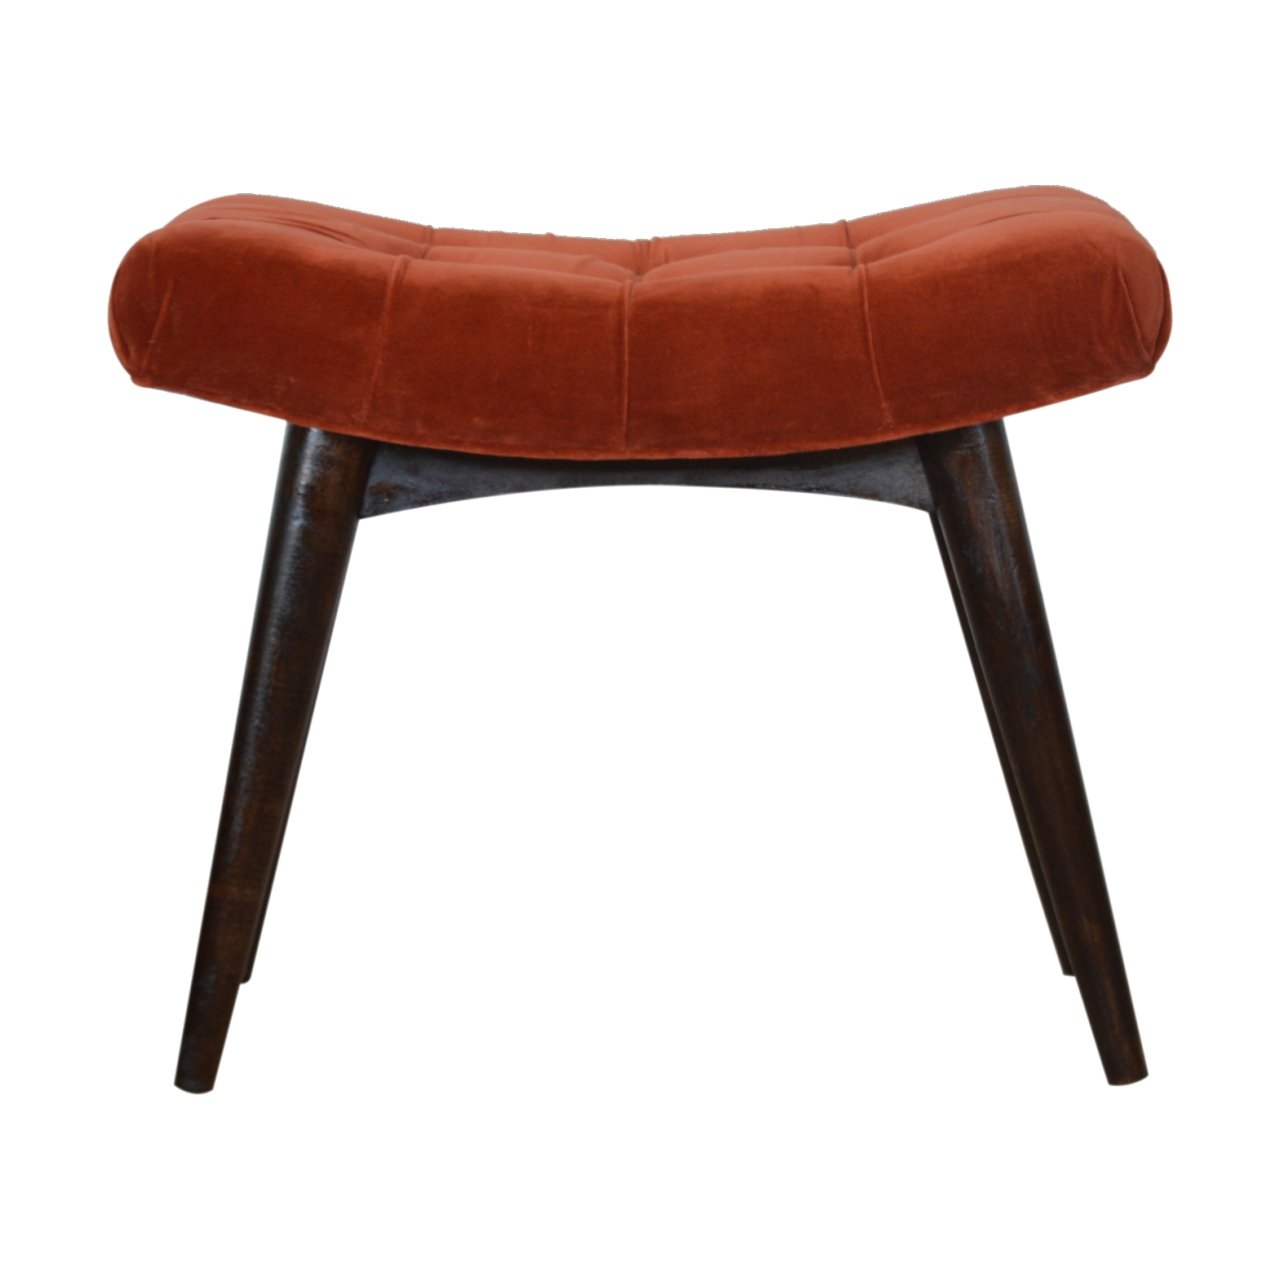 View Brick Red Cotton Velvet Curved Bench information